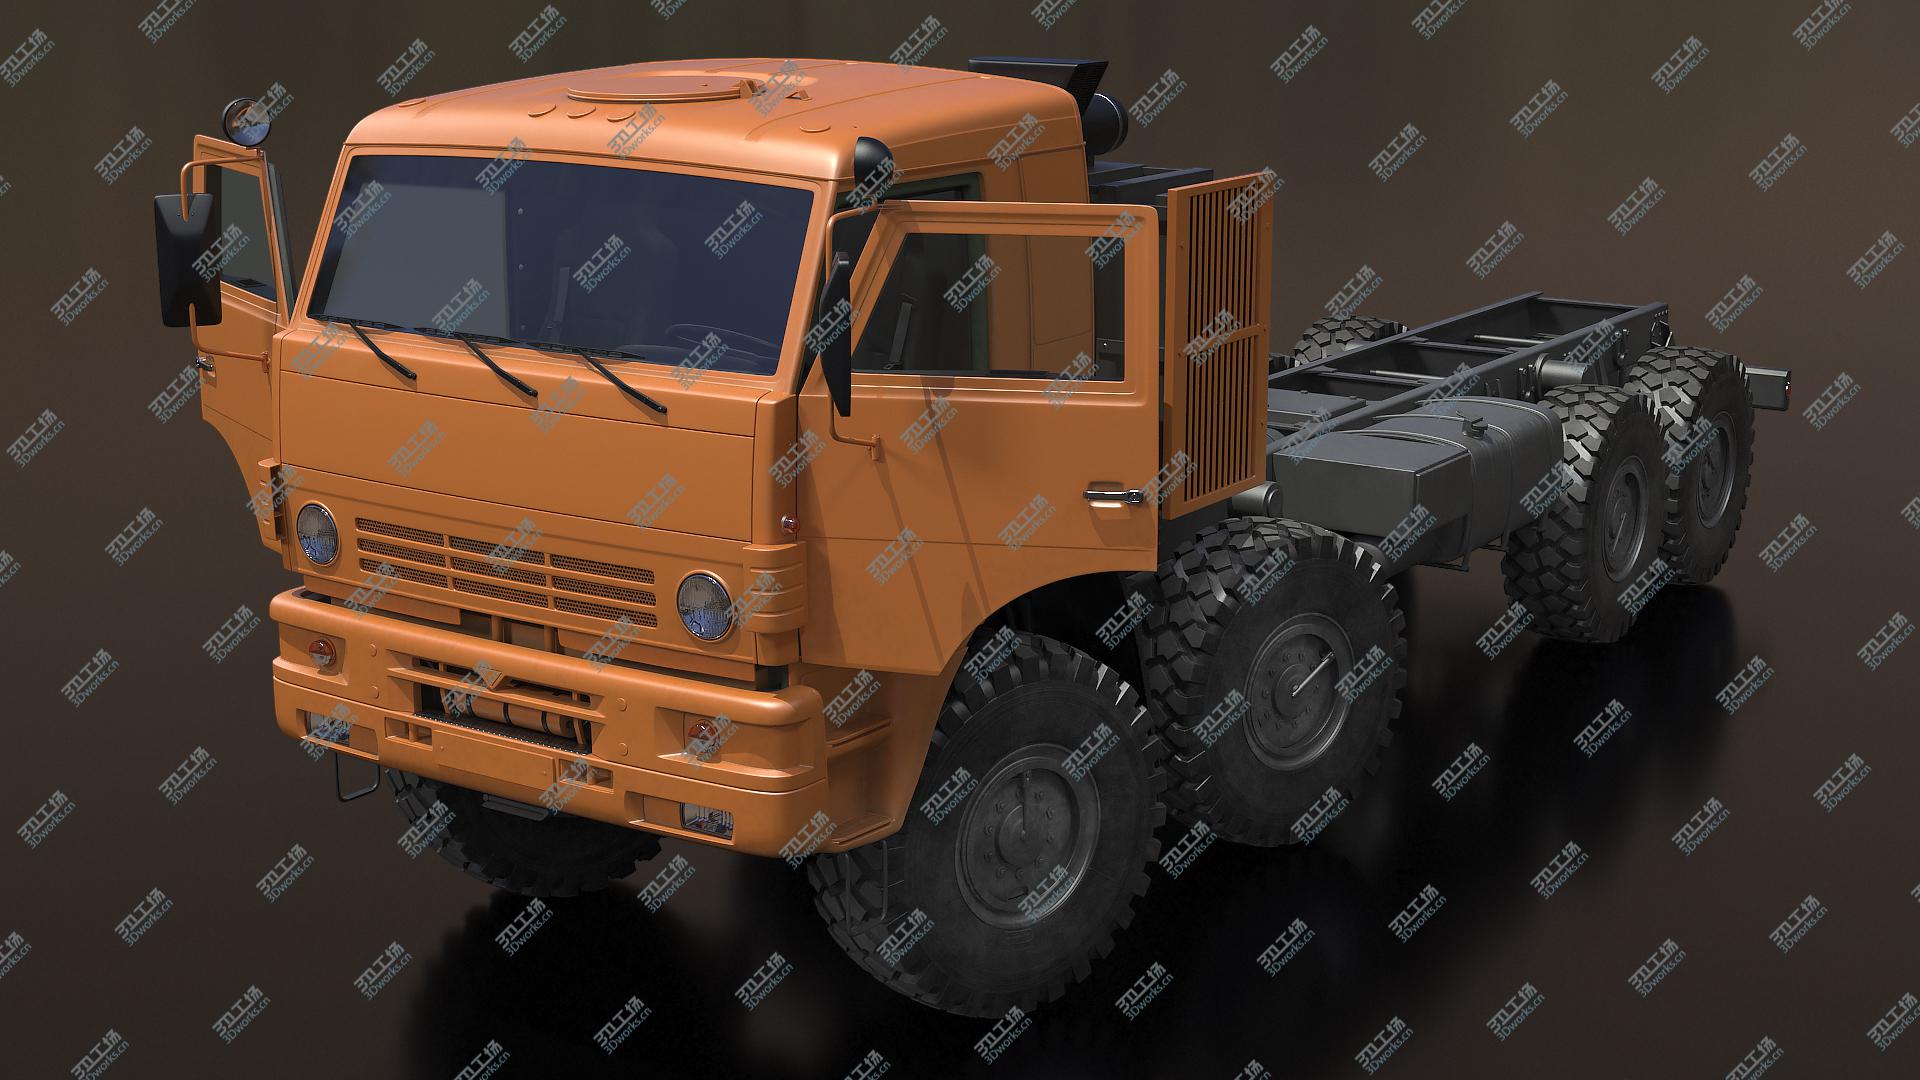 images/goods_img/202104021/3D 8x8 Truck Generic Rigged/2.jpg